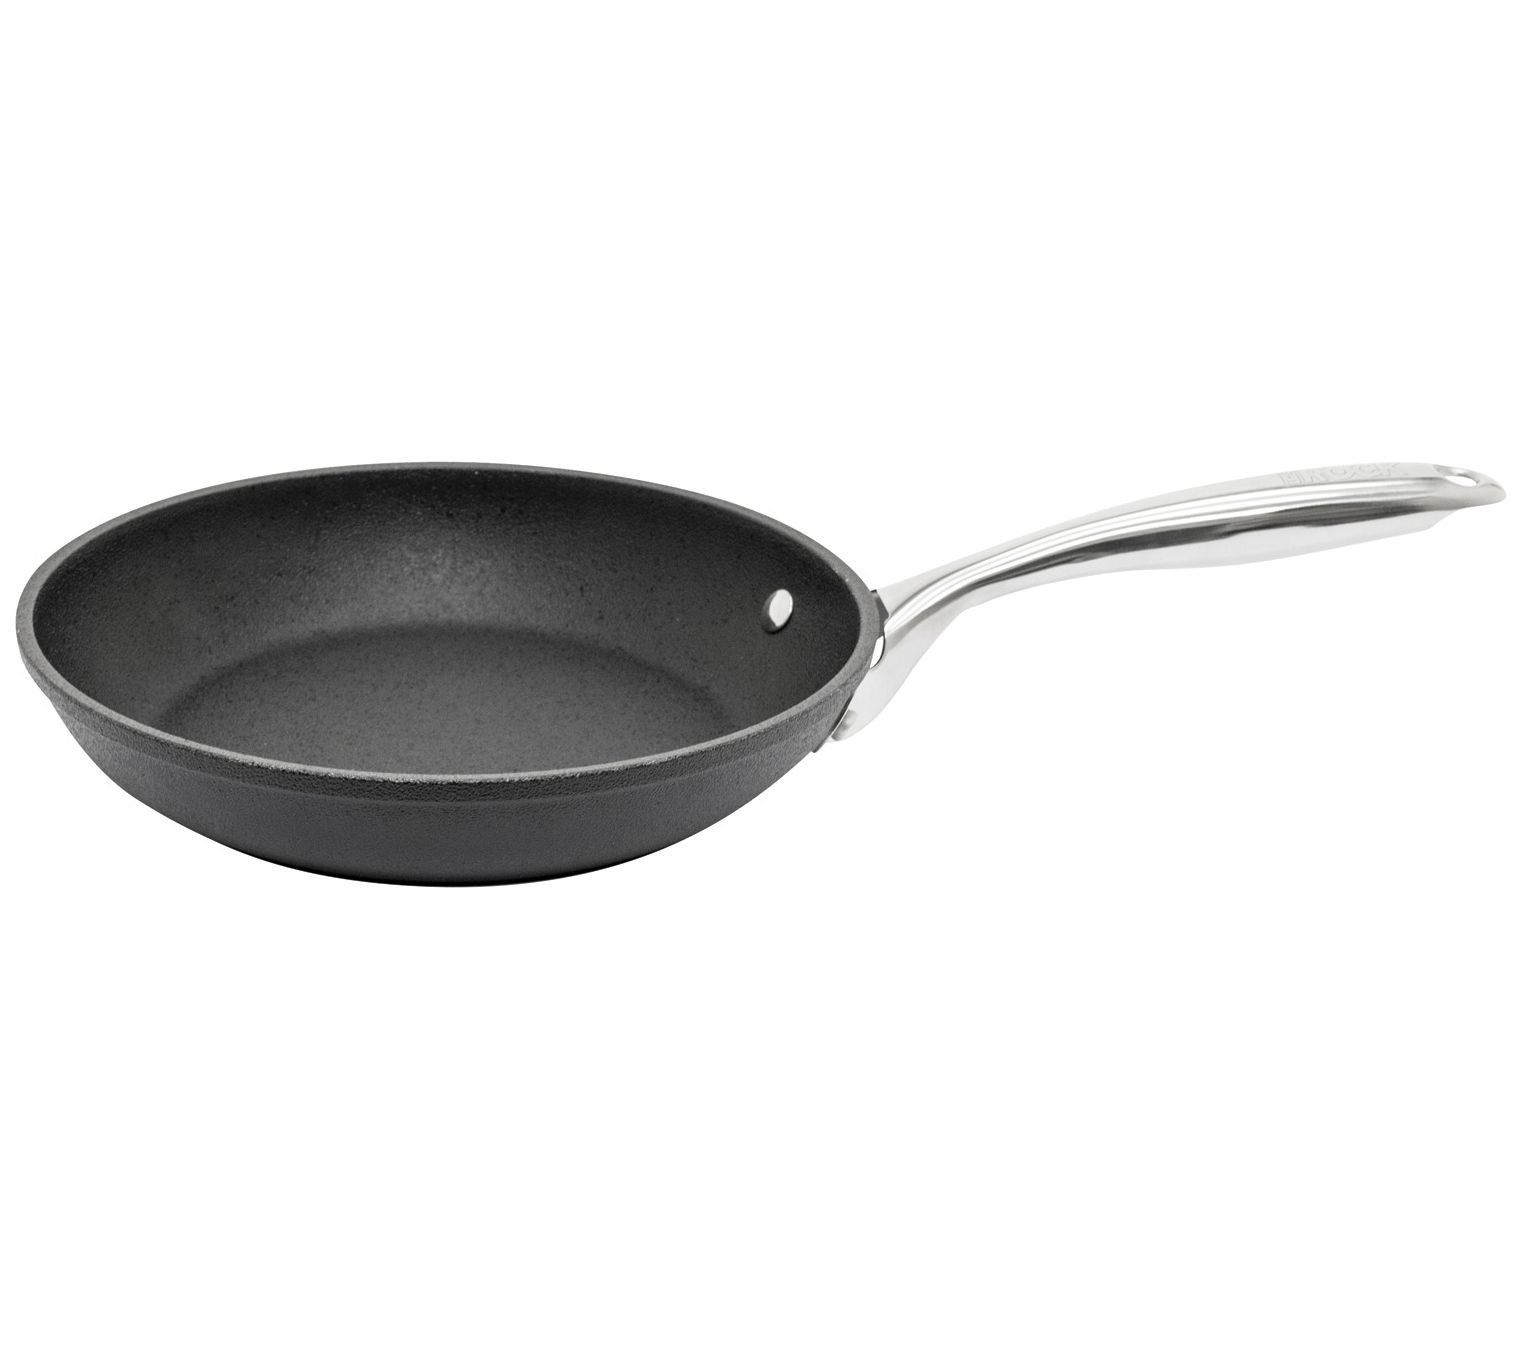 THE ROCK by Starfrit Fry Pan with Bakelite Handle, 9.5